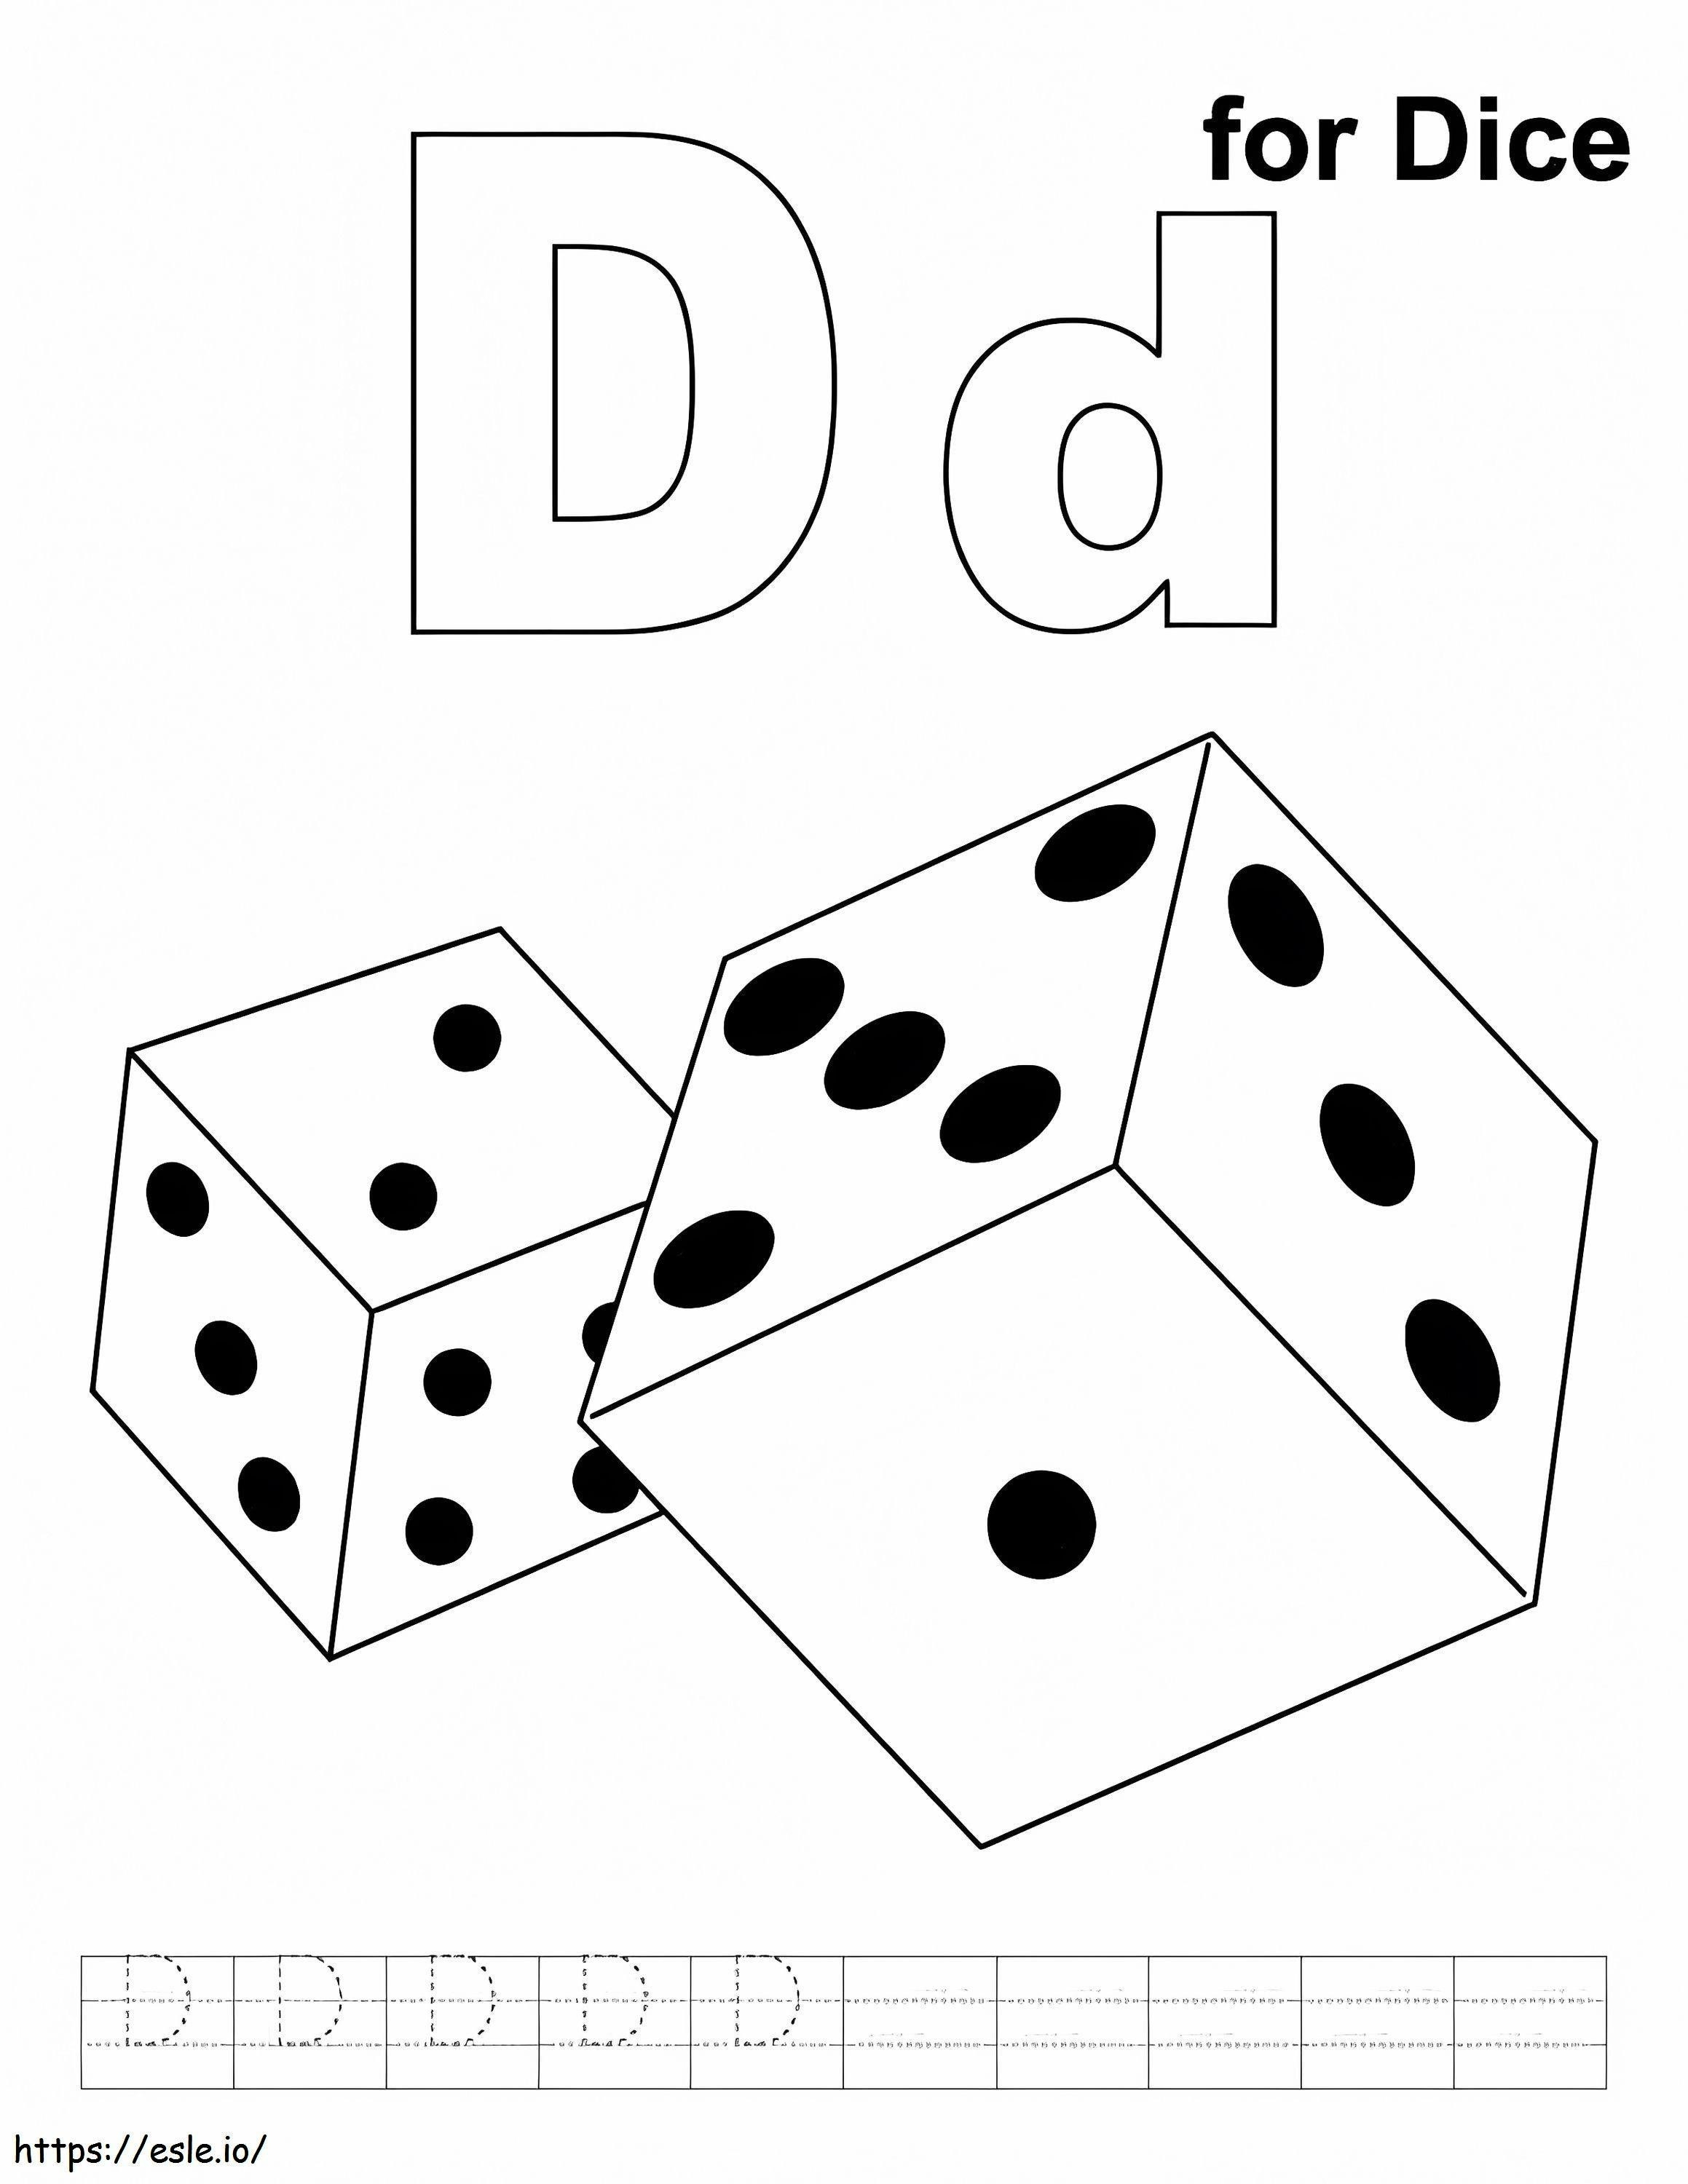 D For Dice coloring page